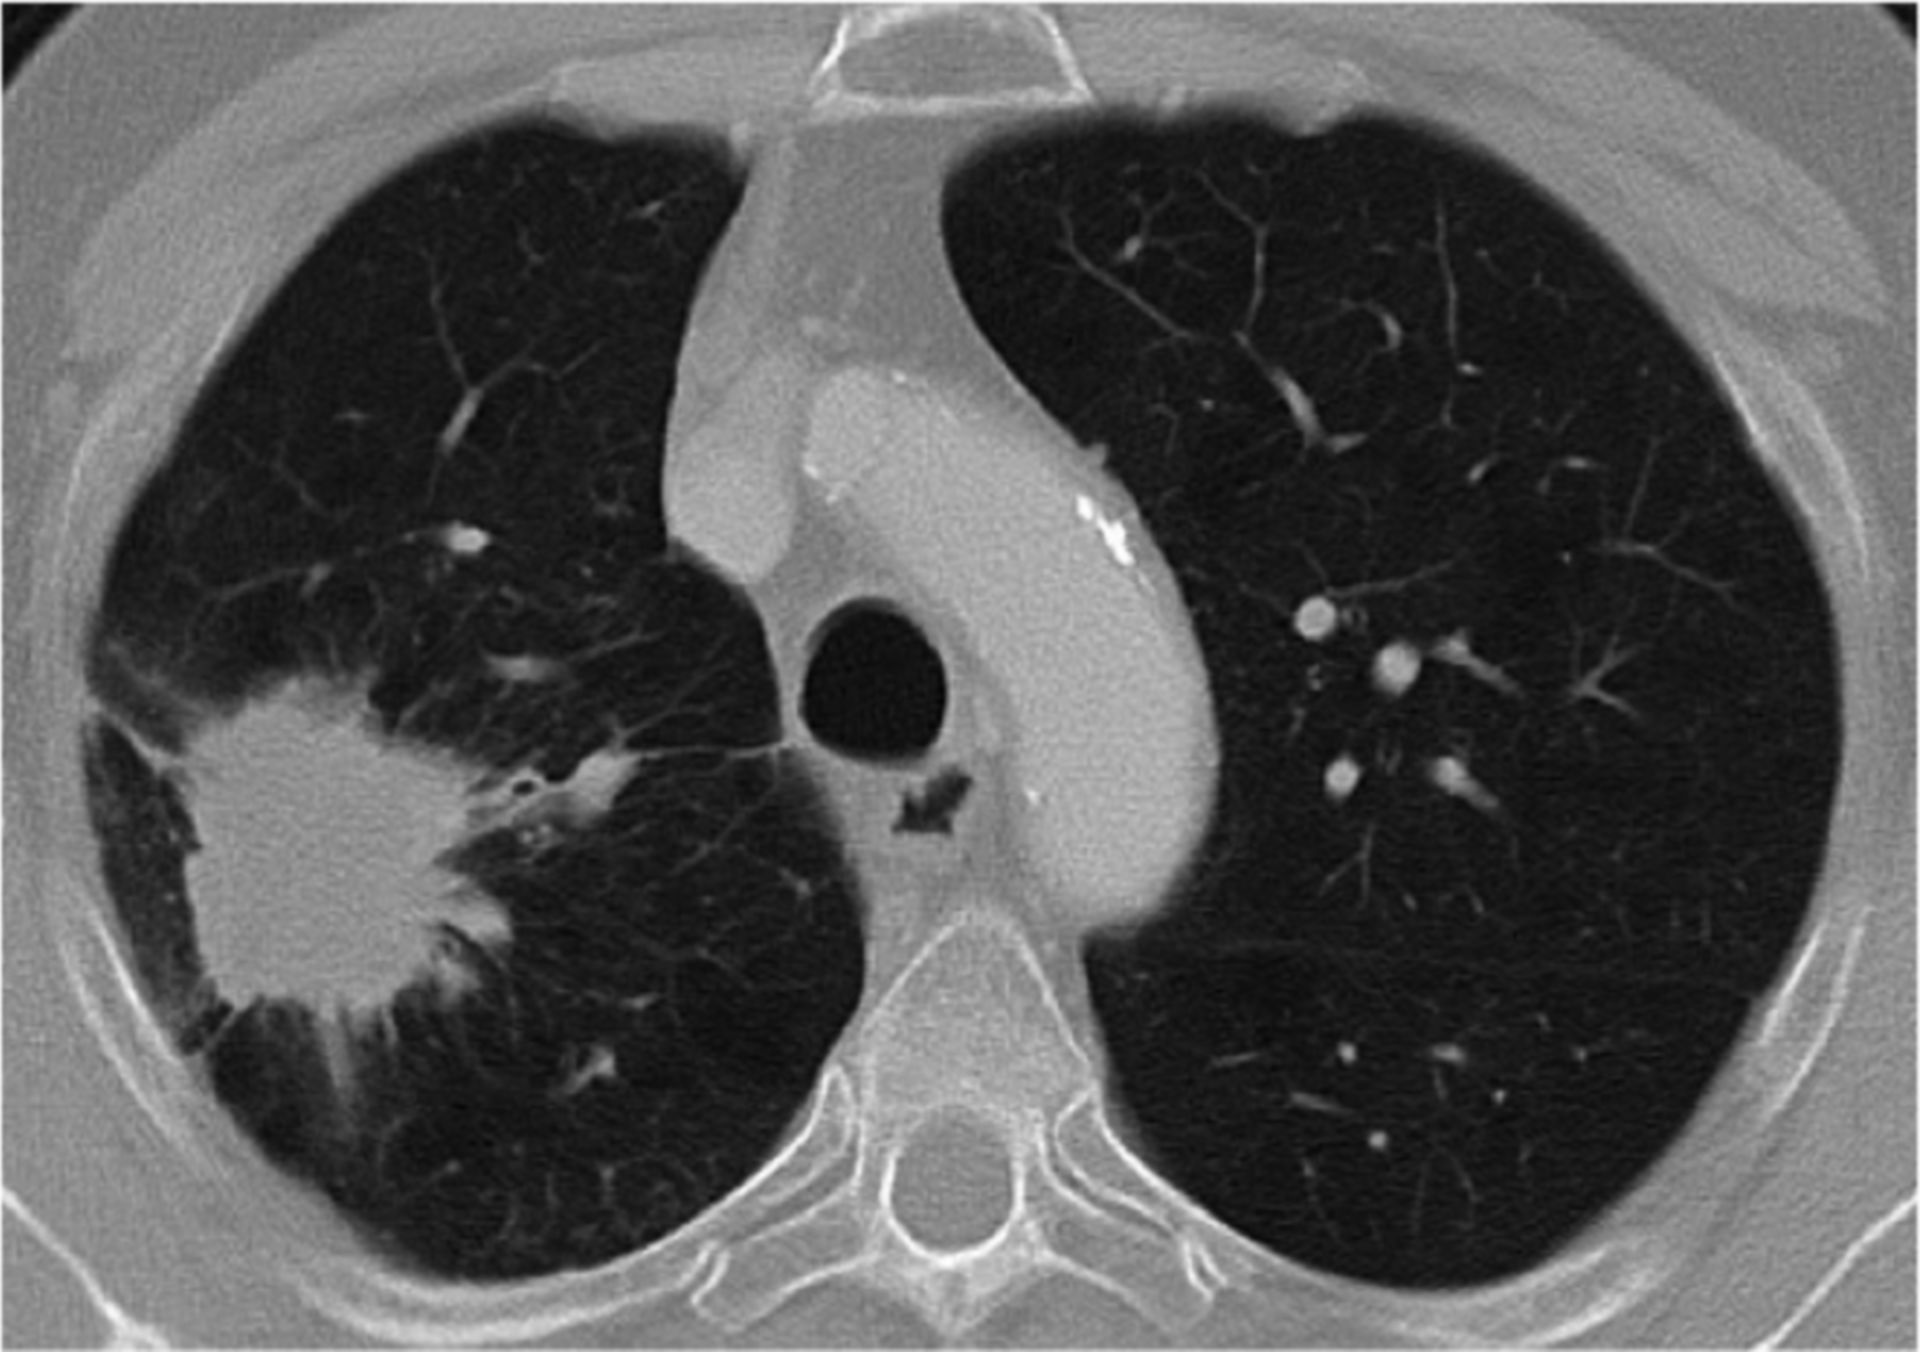 Computer tomography of the thorax (lung carcinoma)